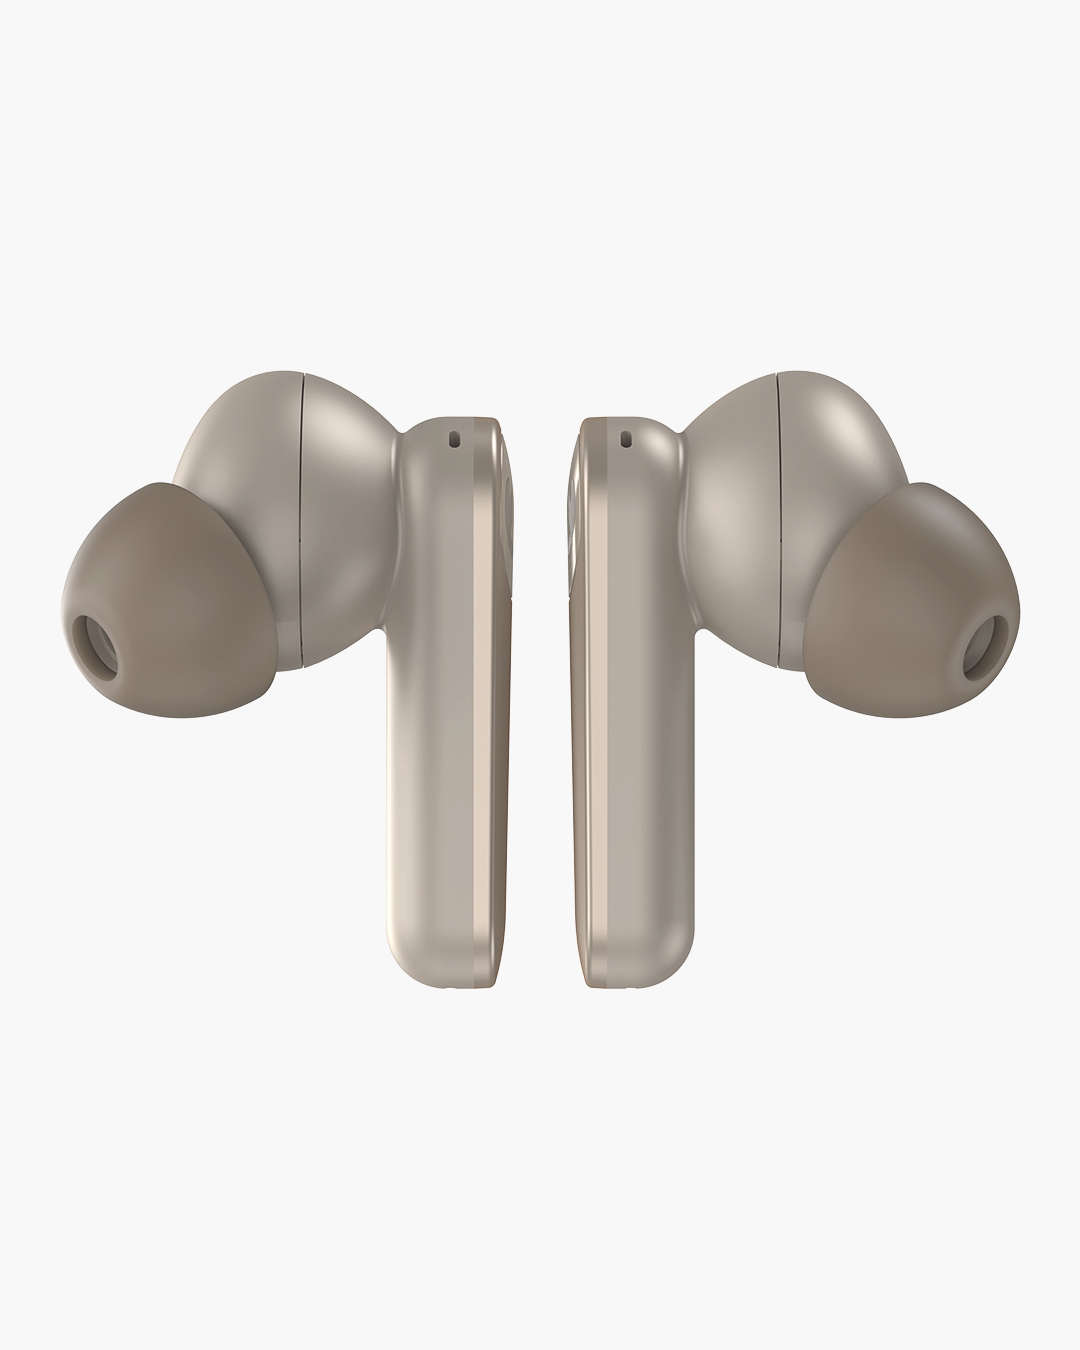 Fresh 'n Rebel - Twins ANC - True Wireless In-ear headphones with active noise cancelling - Silky Sand